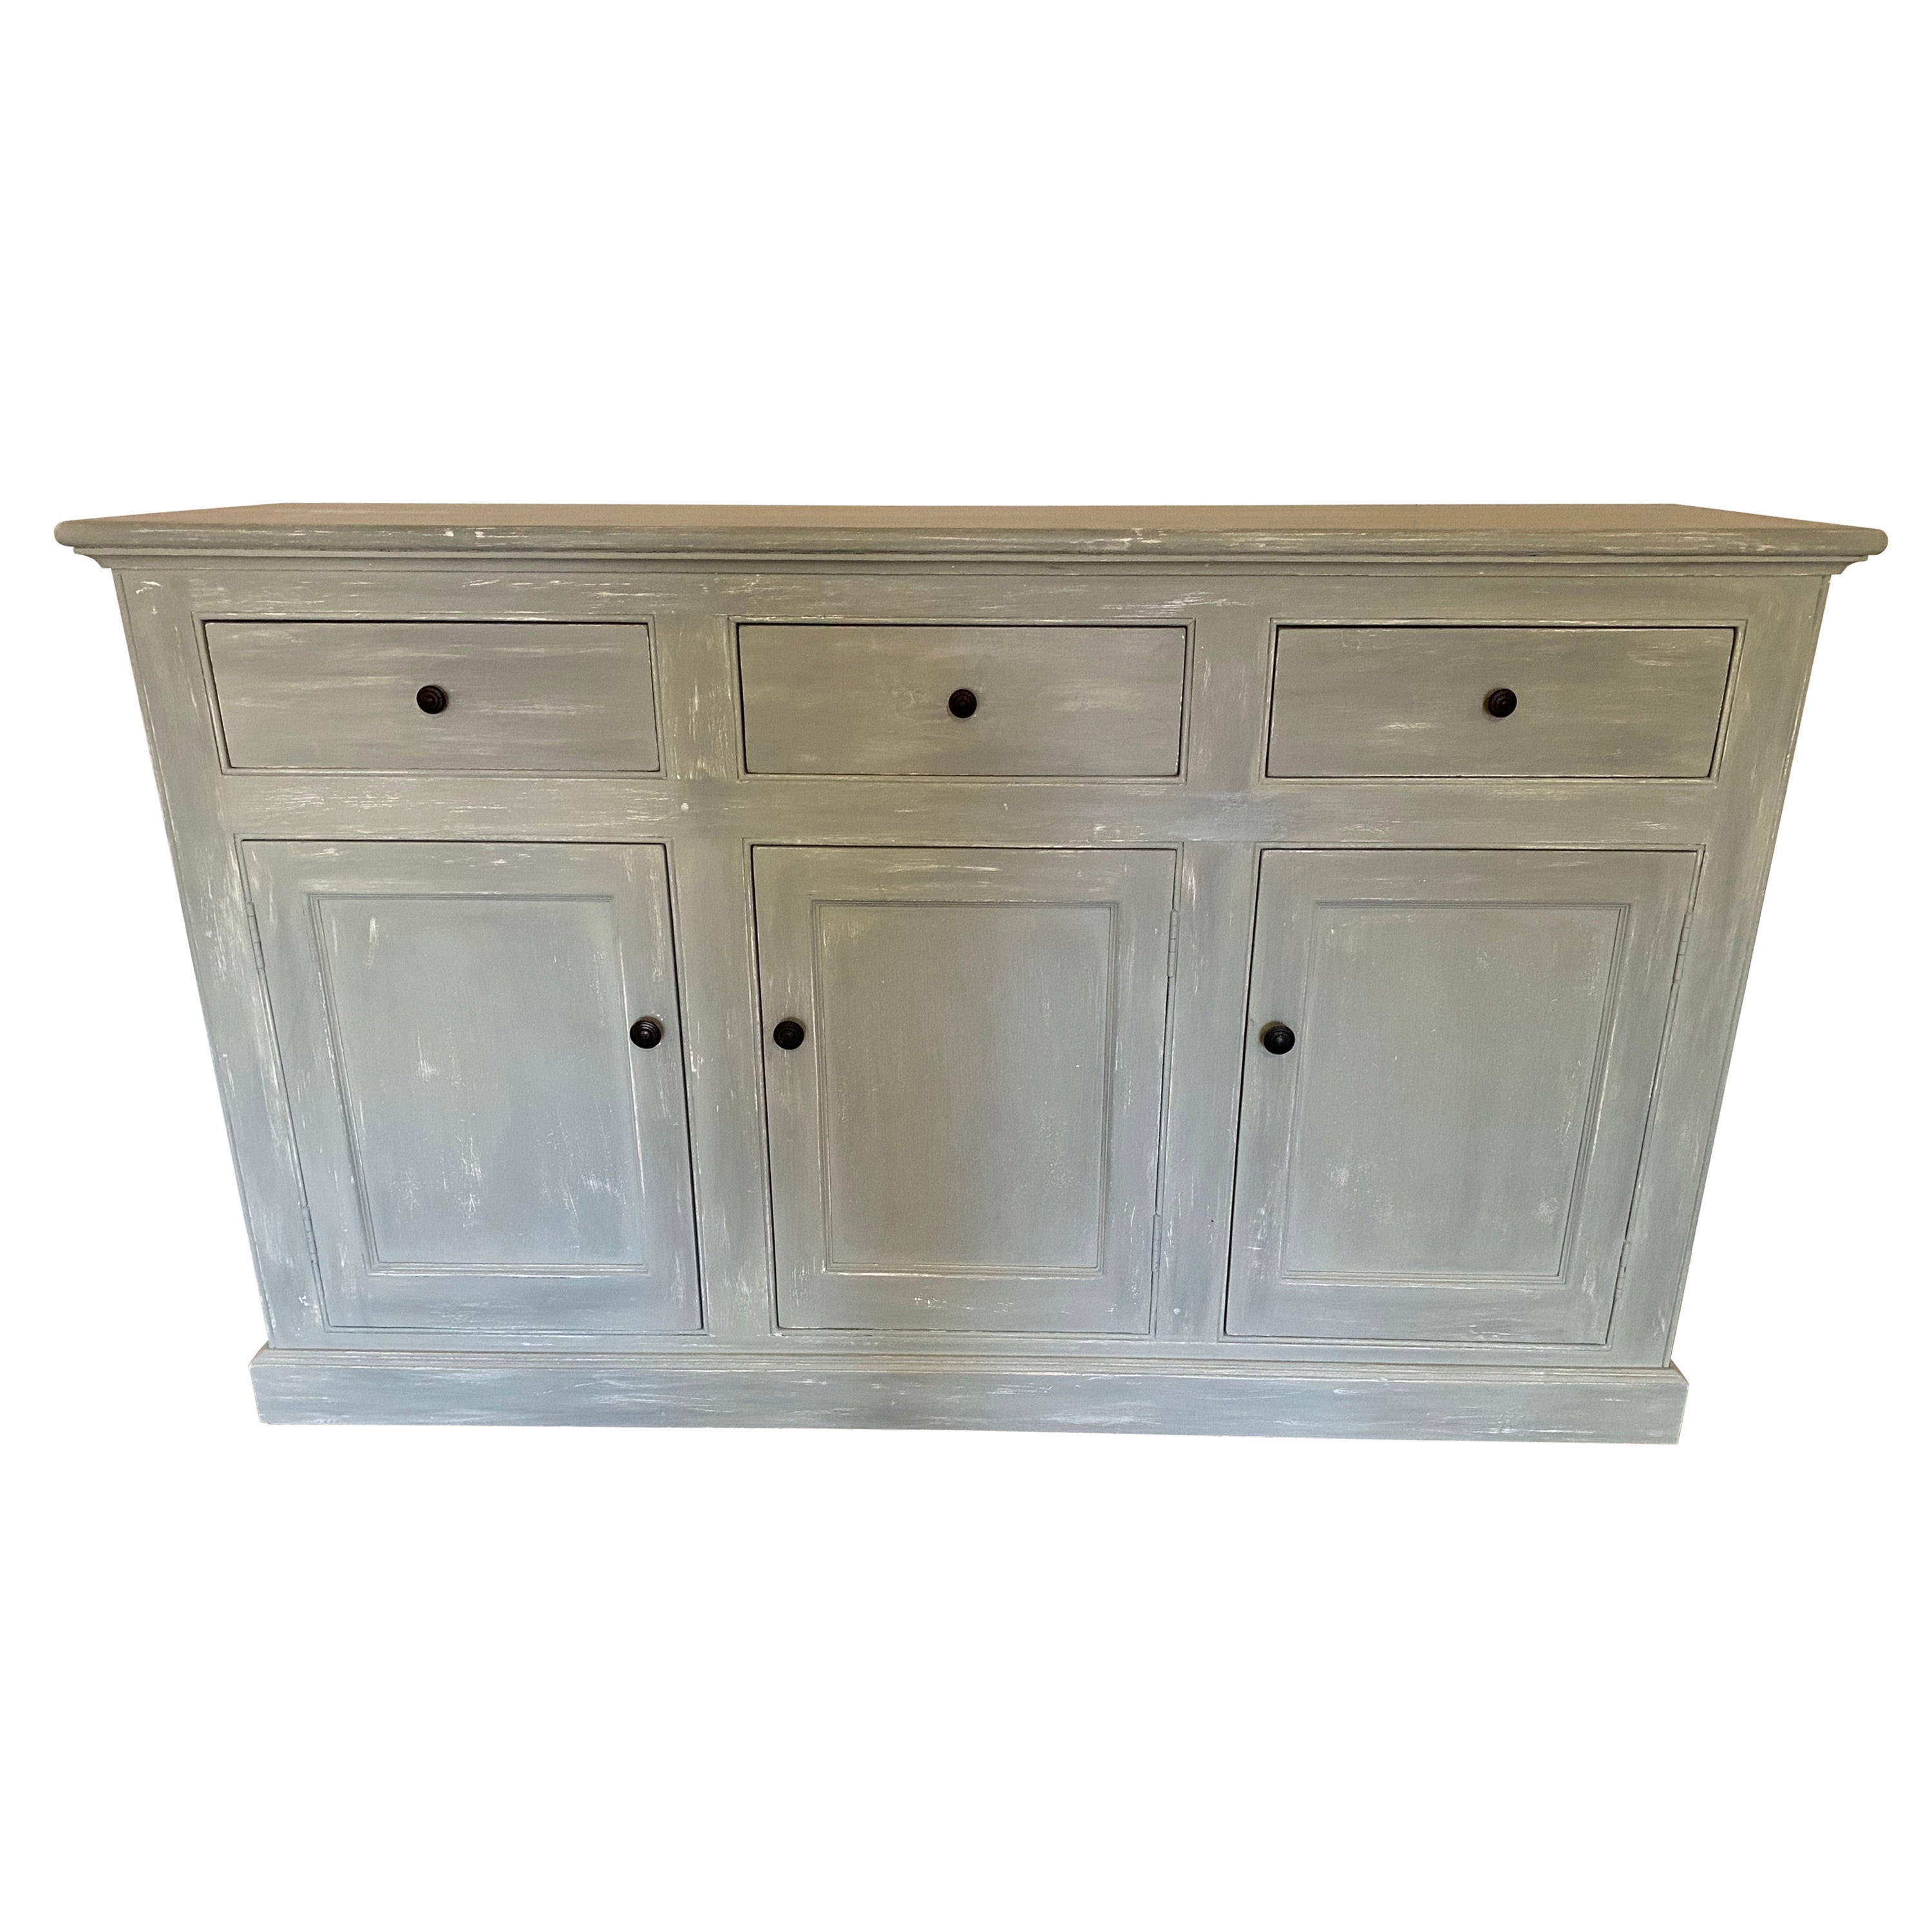 Large and Tall Country Style Kitchen or Dining Room Server Chest